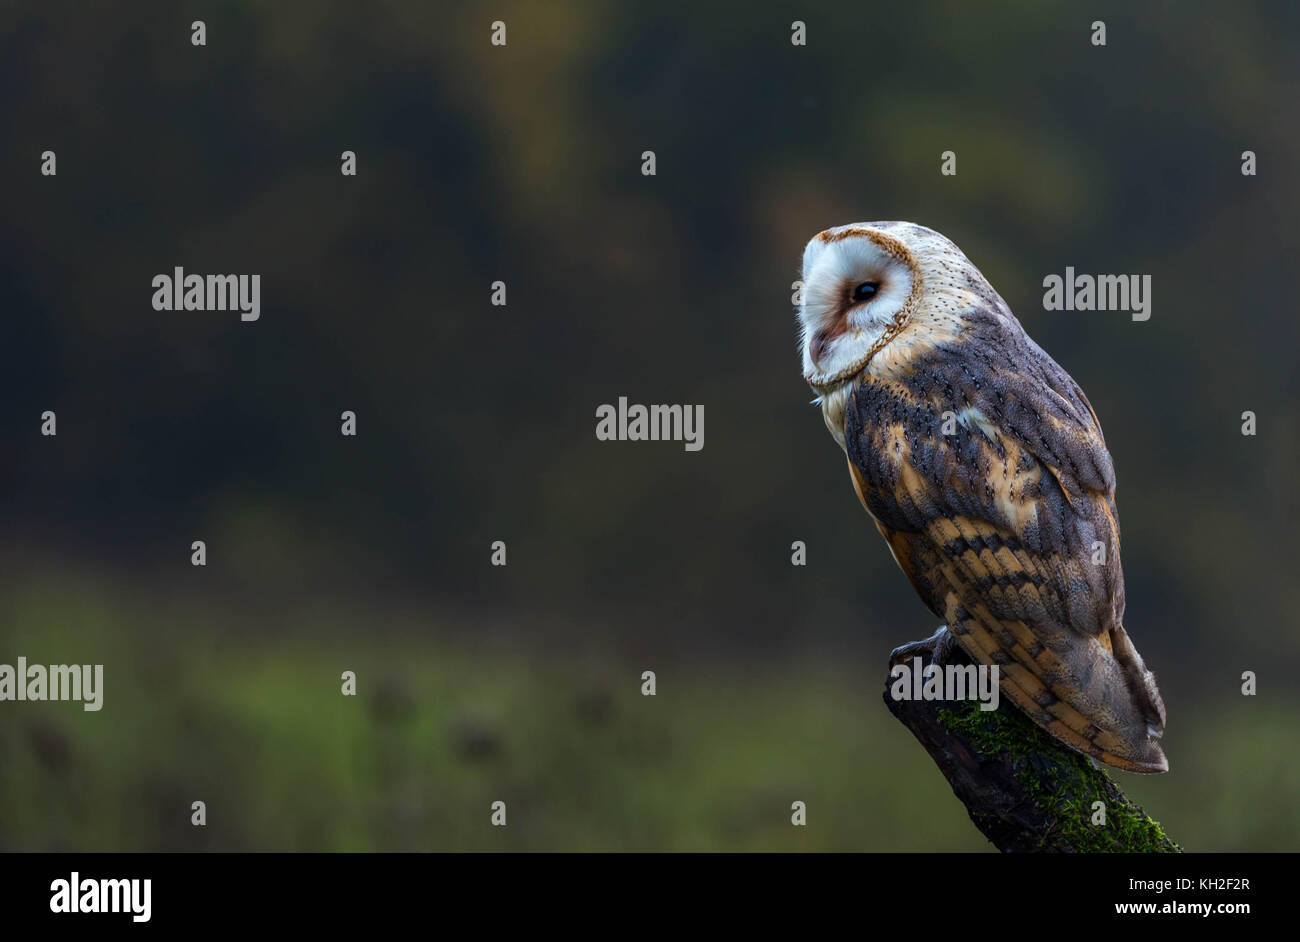 A captive Barn Owl resting on a tree trunk in the midst of a meadow Stock Photo